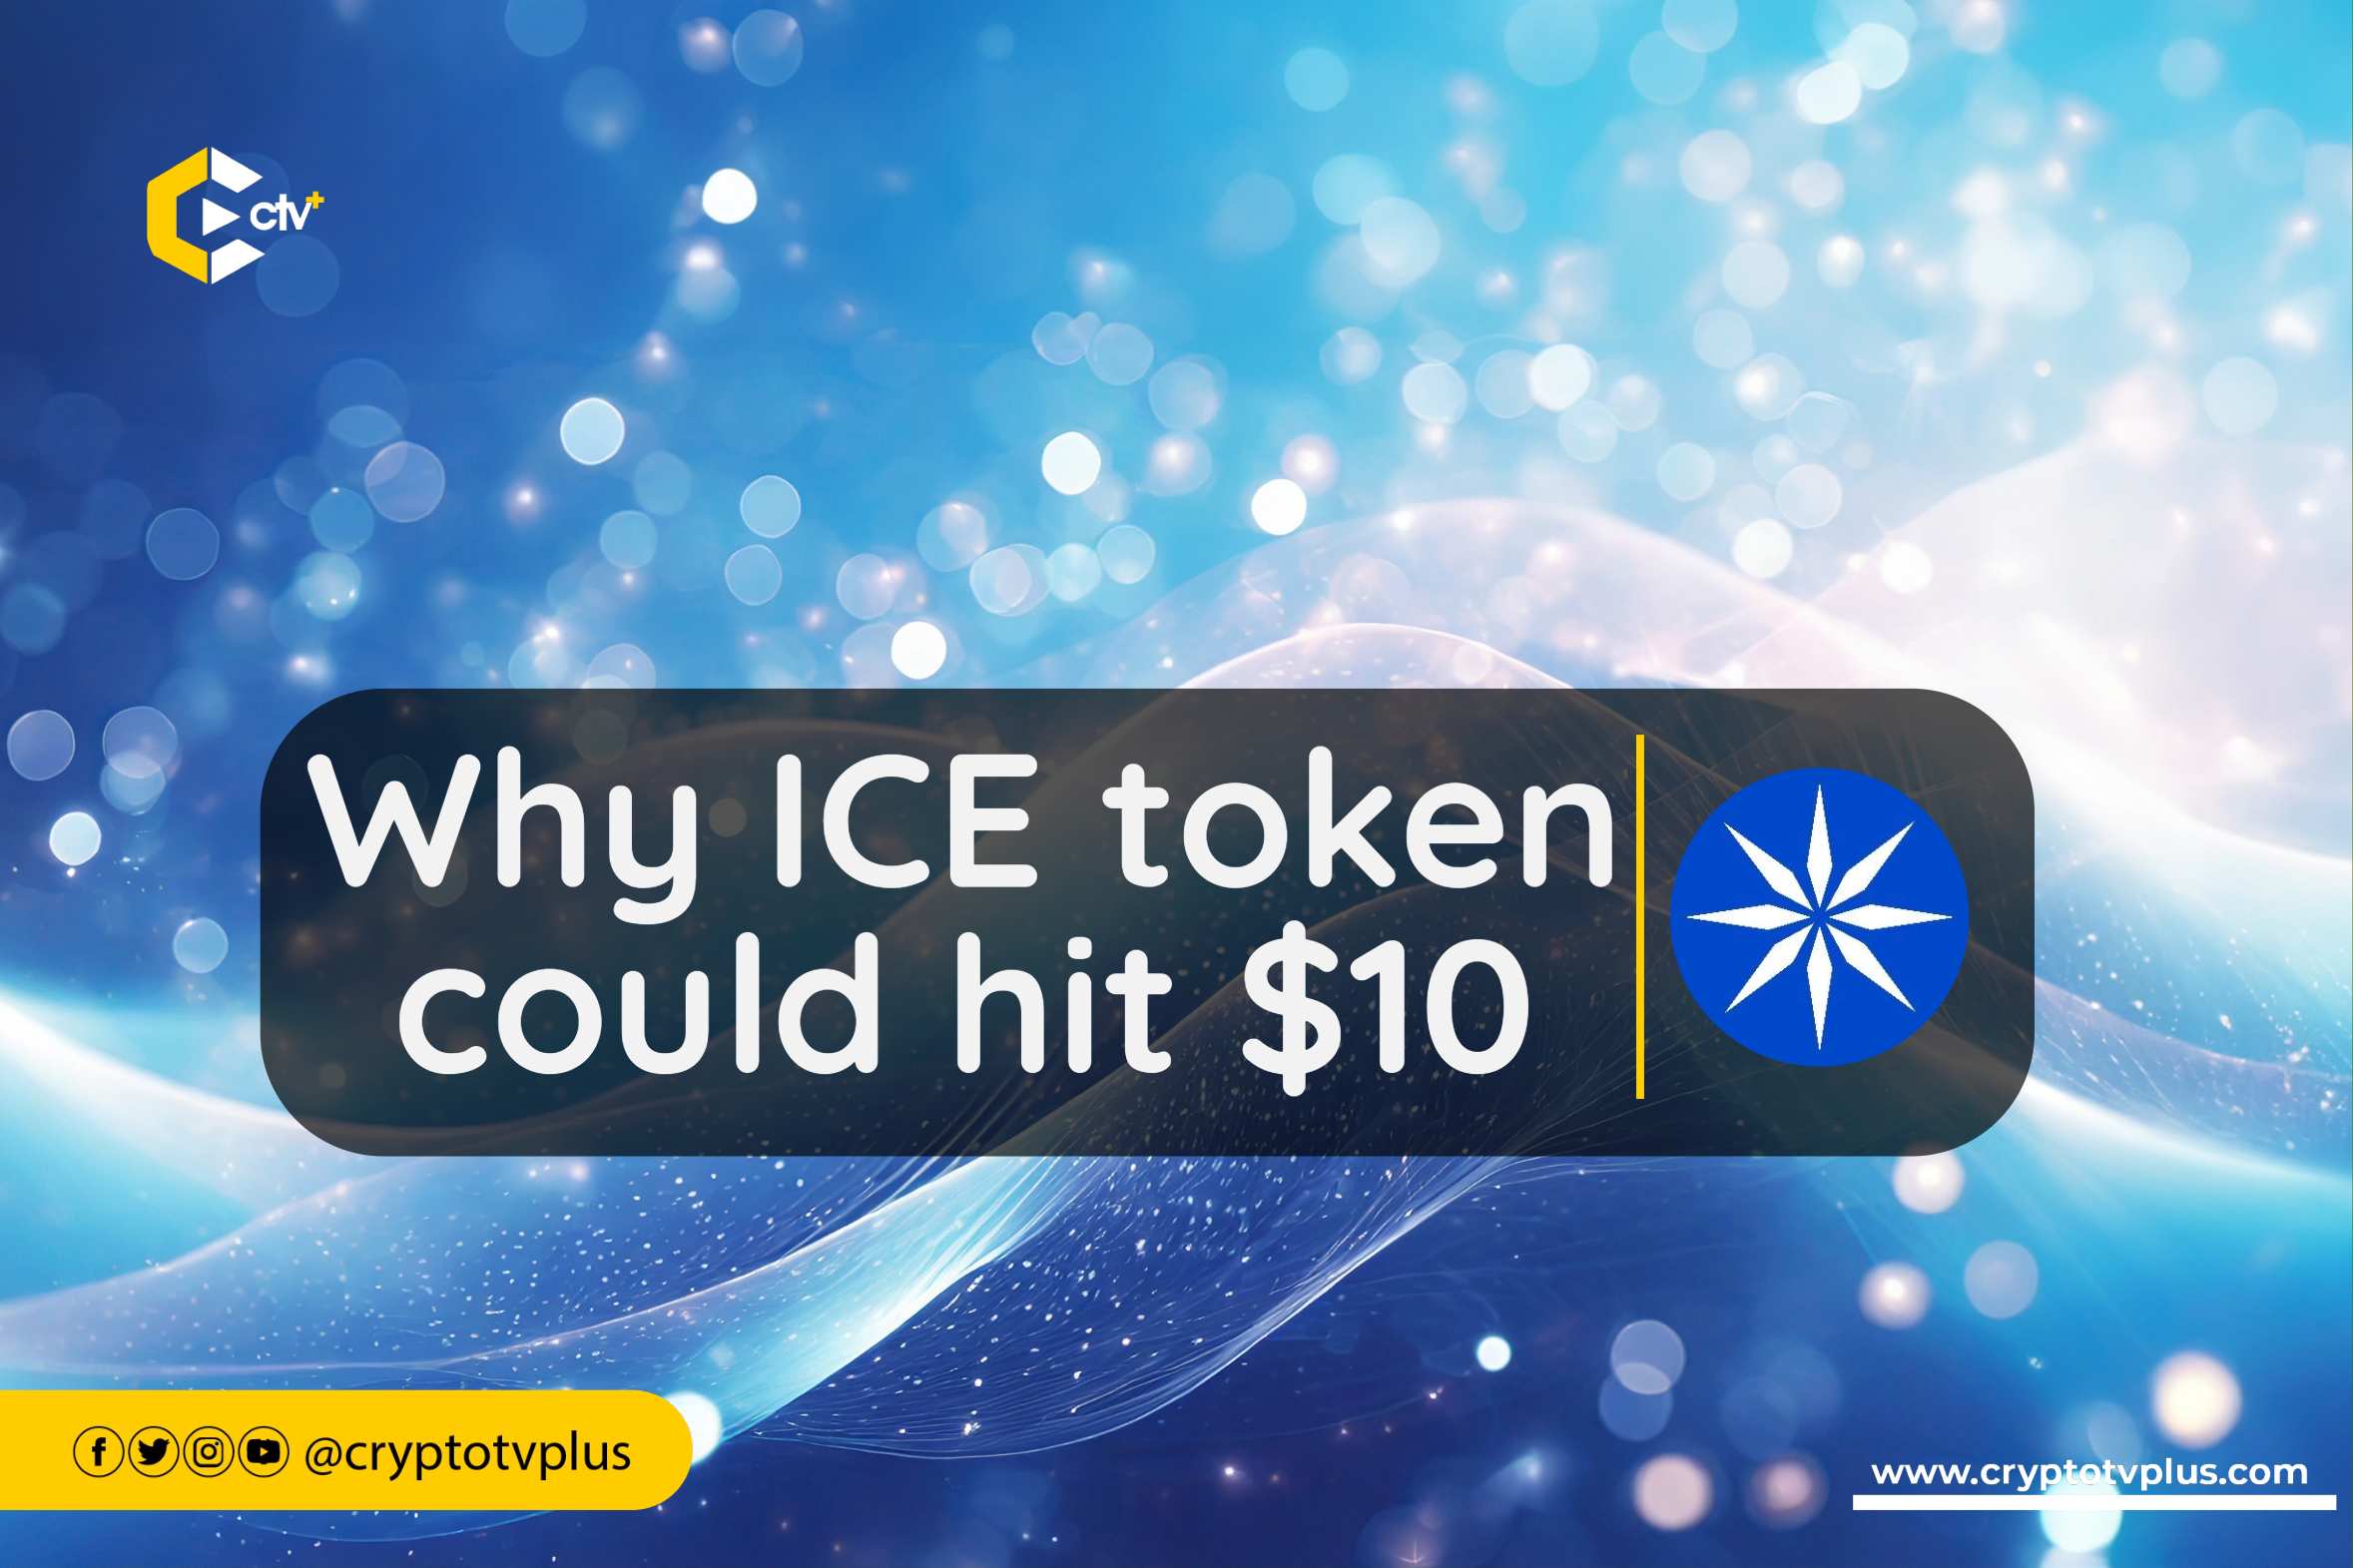 Why ICE token could hit $10